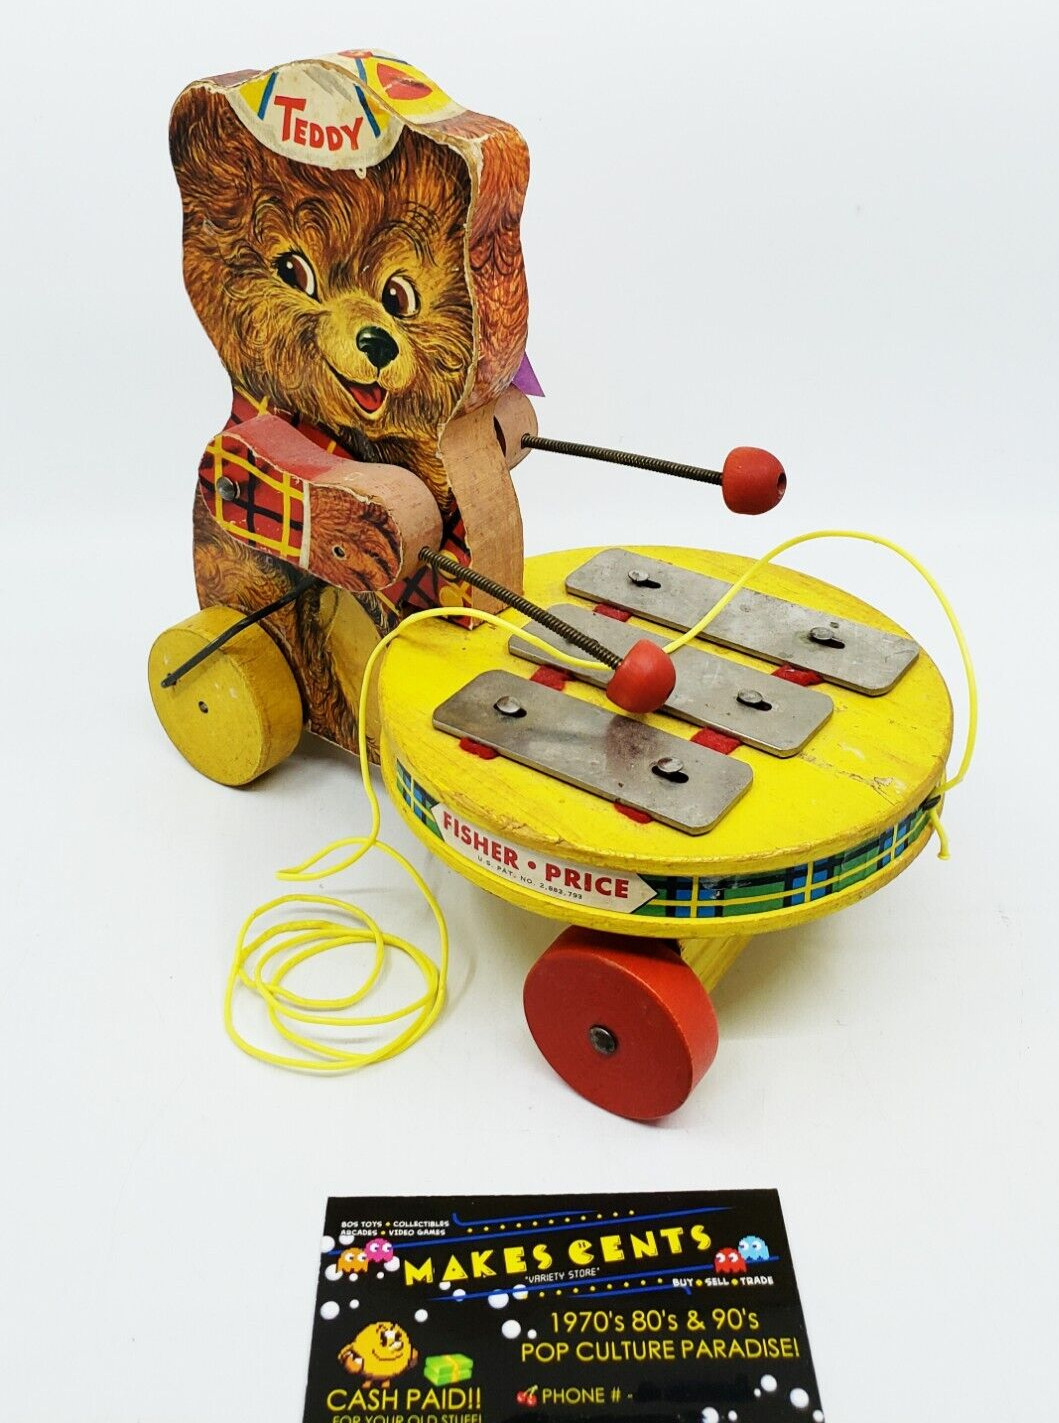 1964 Vintage Fisher Price Teddy Zilo wood Pull Toy Xylophone Toy Plaid Shirt